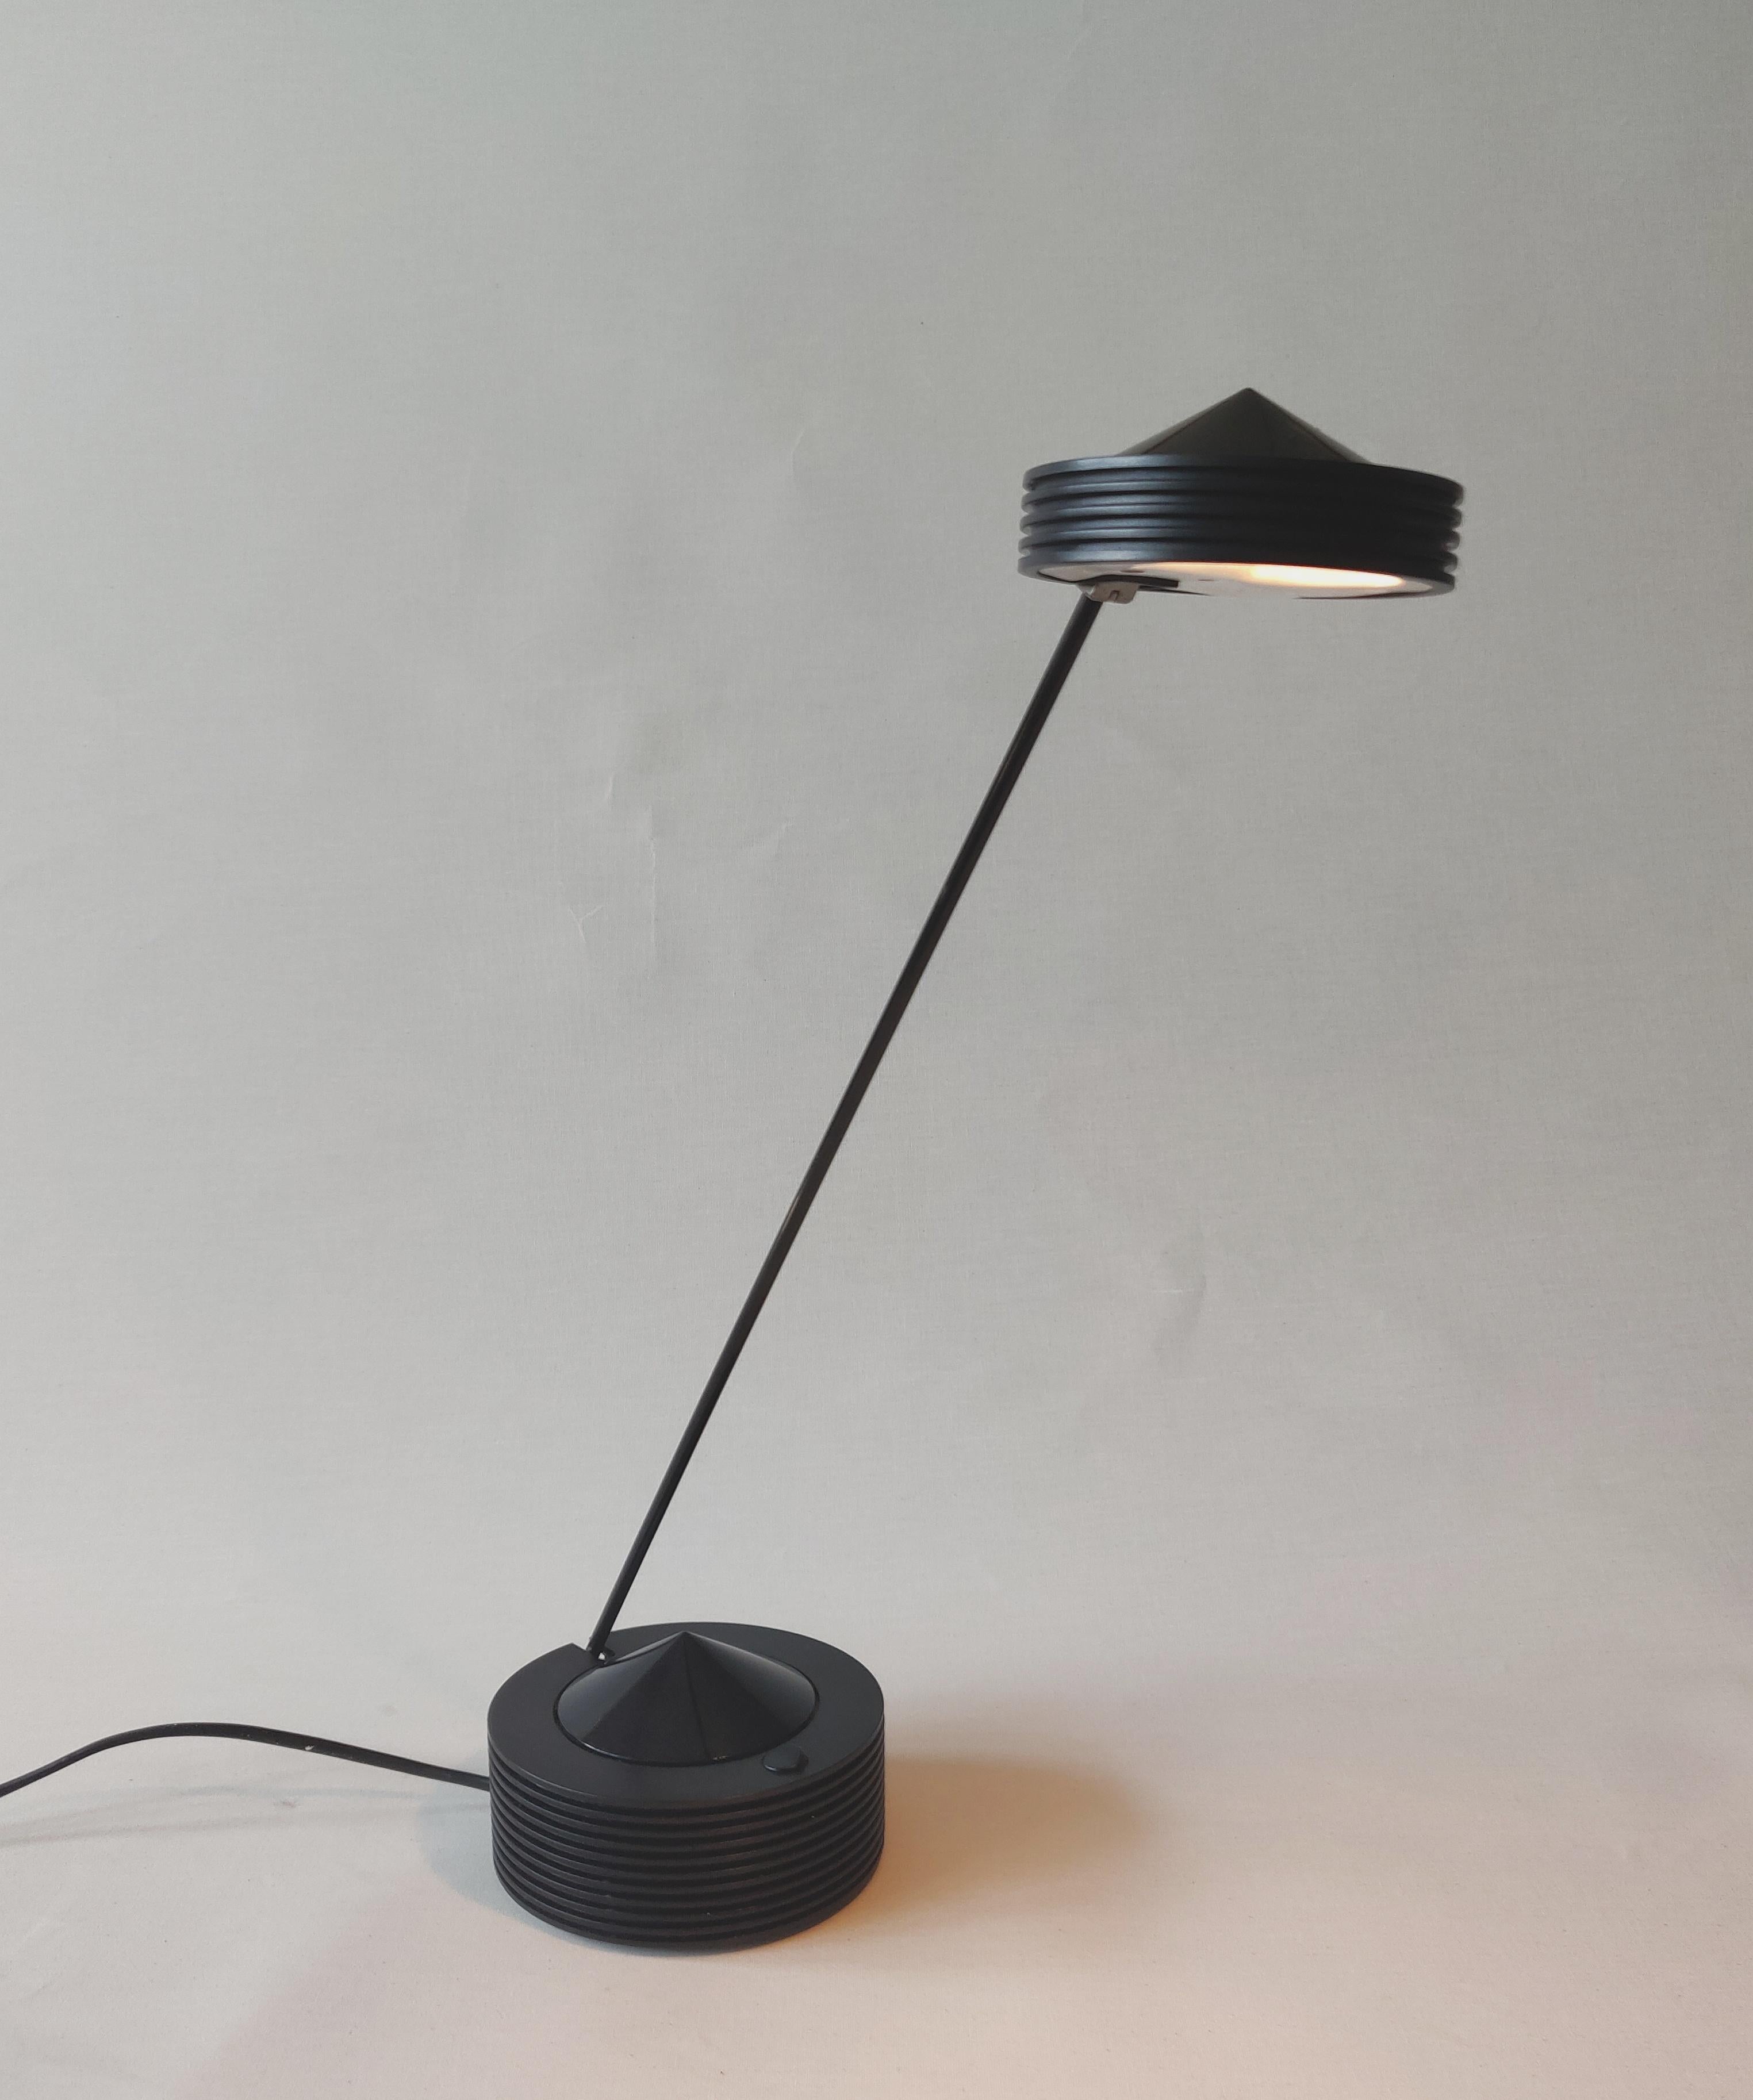 Dutch Design Memphis Group style desk lamp, 1980s 
Memphis Group style typically combines circles and triangles with black-and-white graphic patterns.

There are two of these lamps available.

AA#230555.